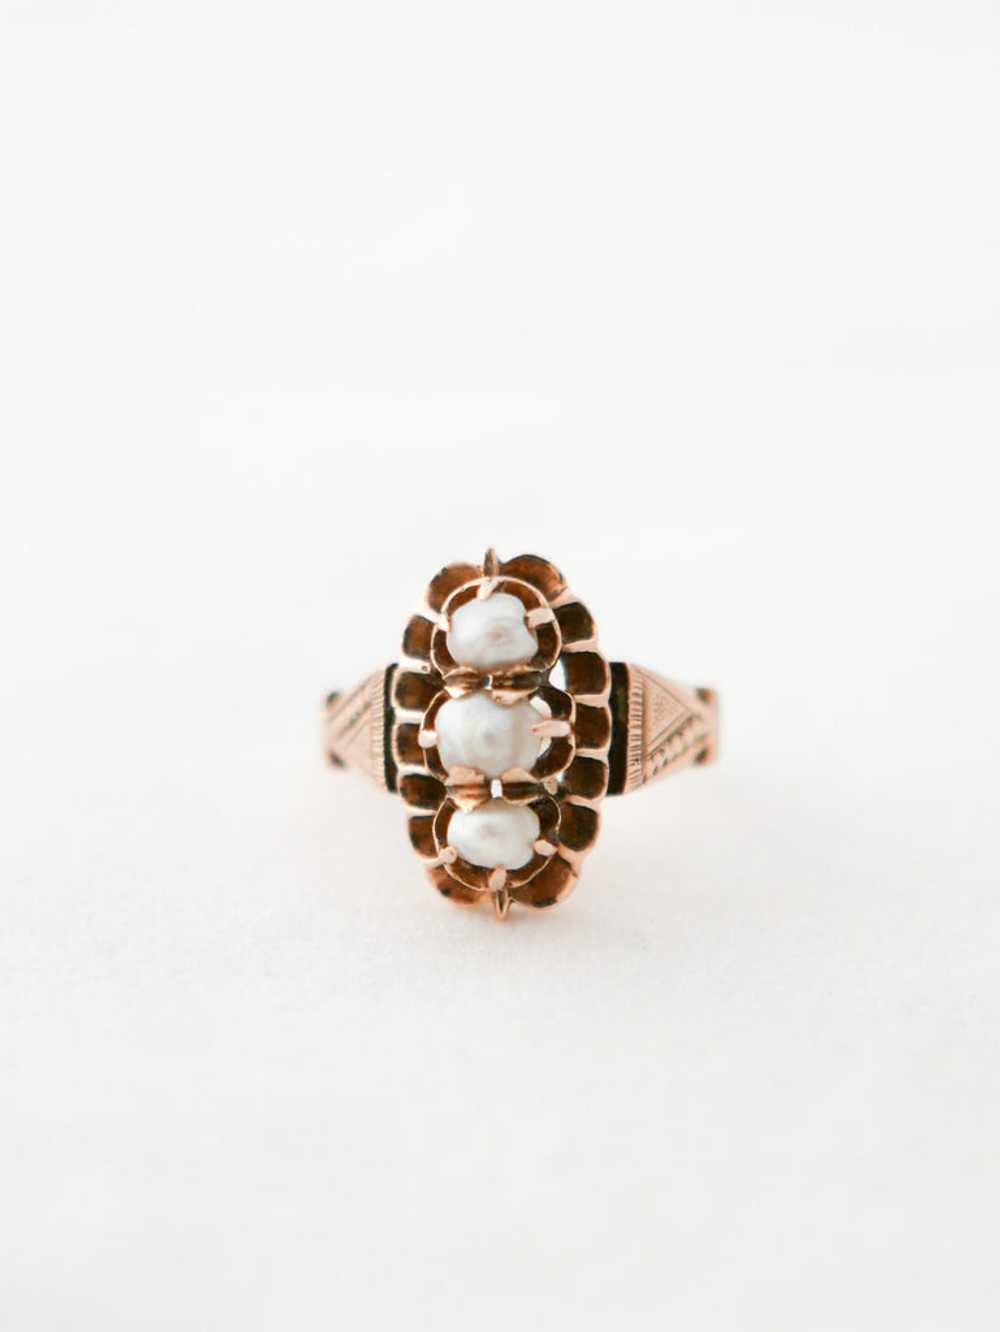 Antique 14K Gold Triple Pearl Ring - image 2